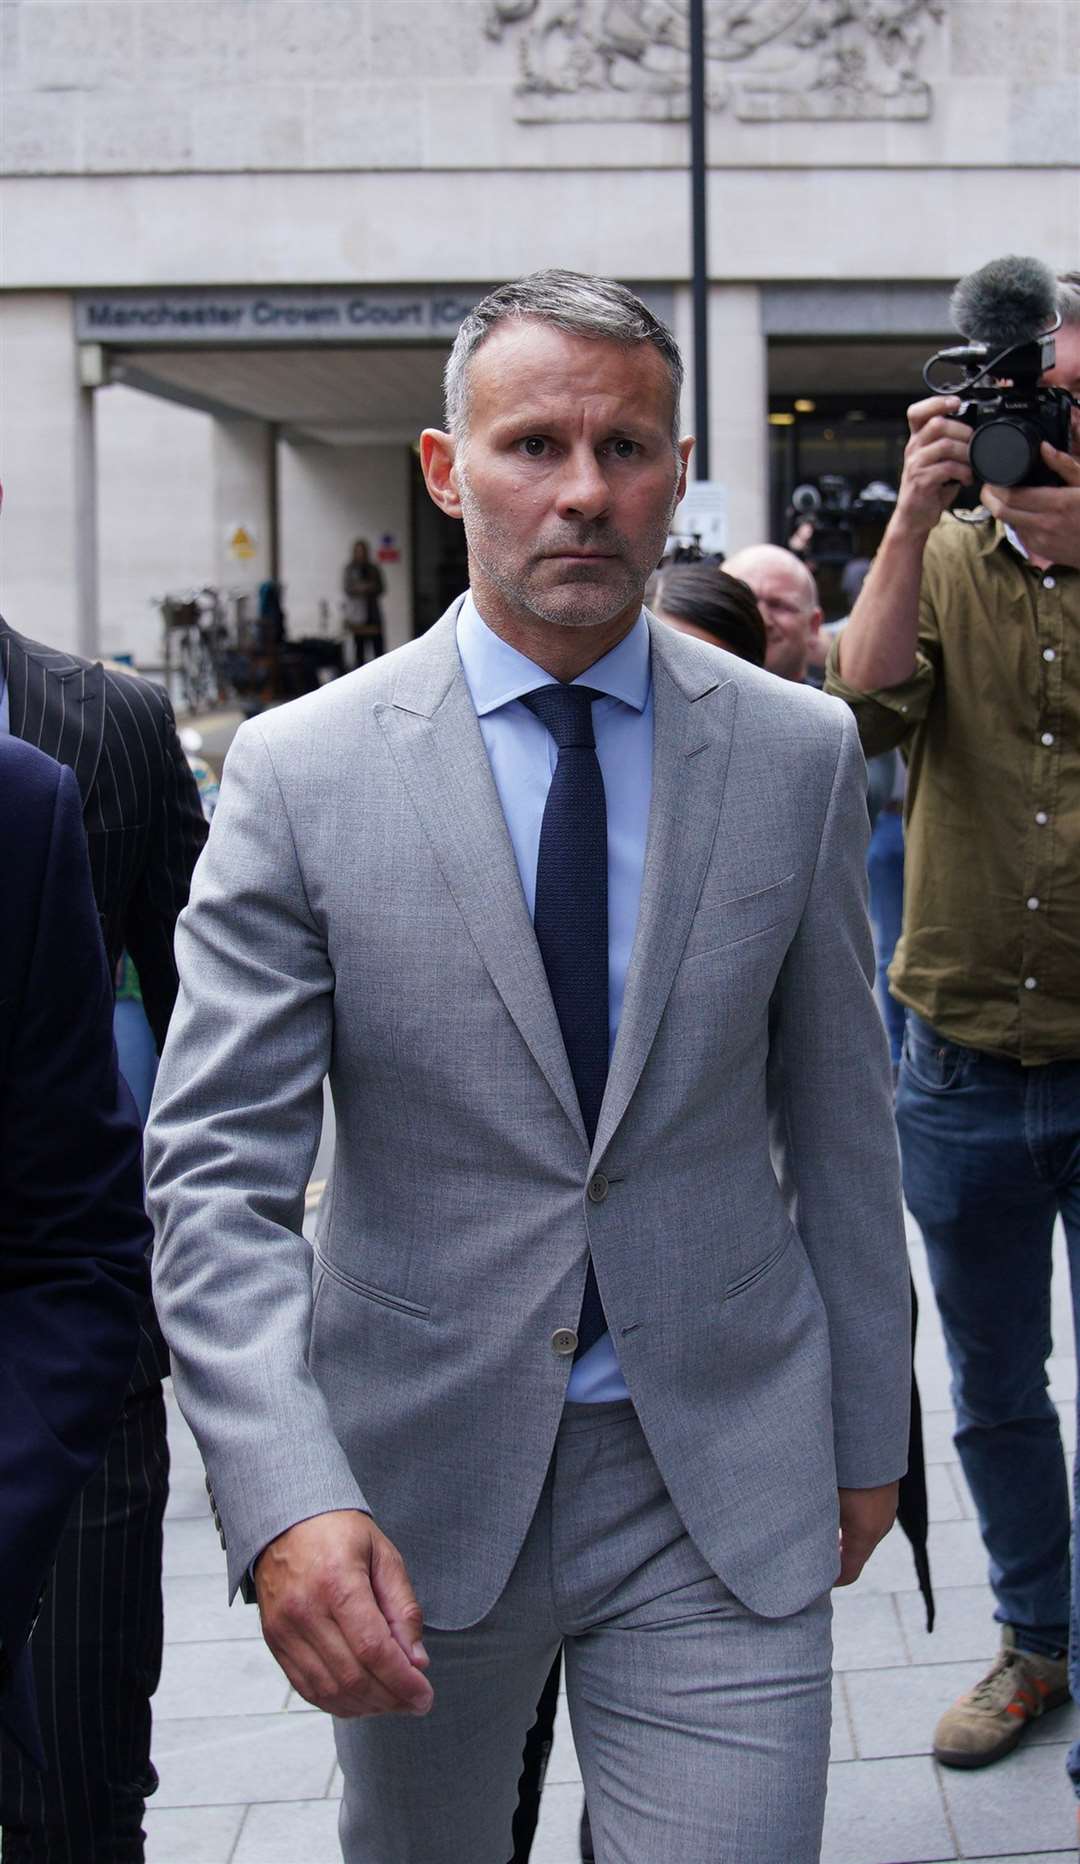 Former Manchester United footballer Ryan Giggs leaving Manchester Crown Court (Peter Byrne/PA)